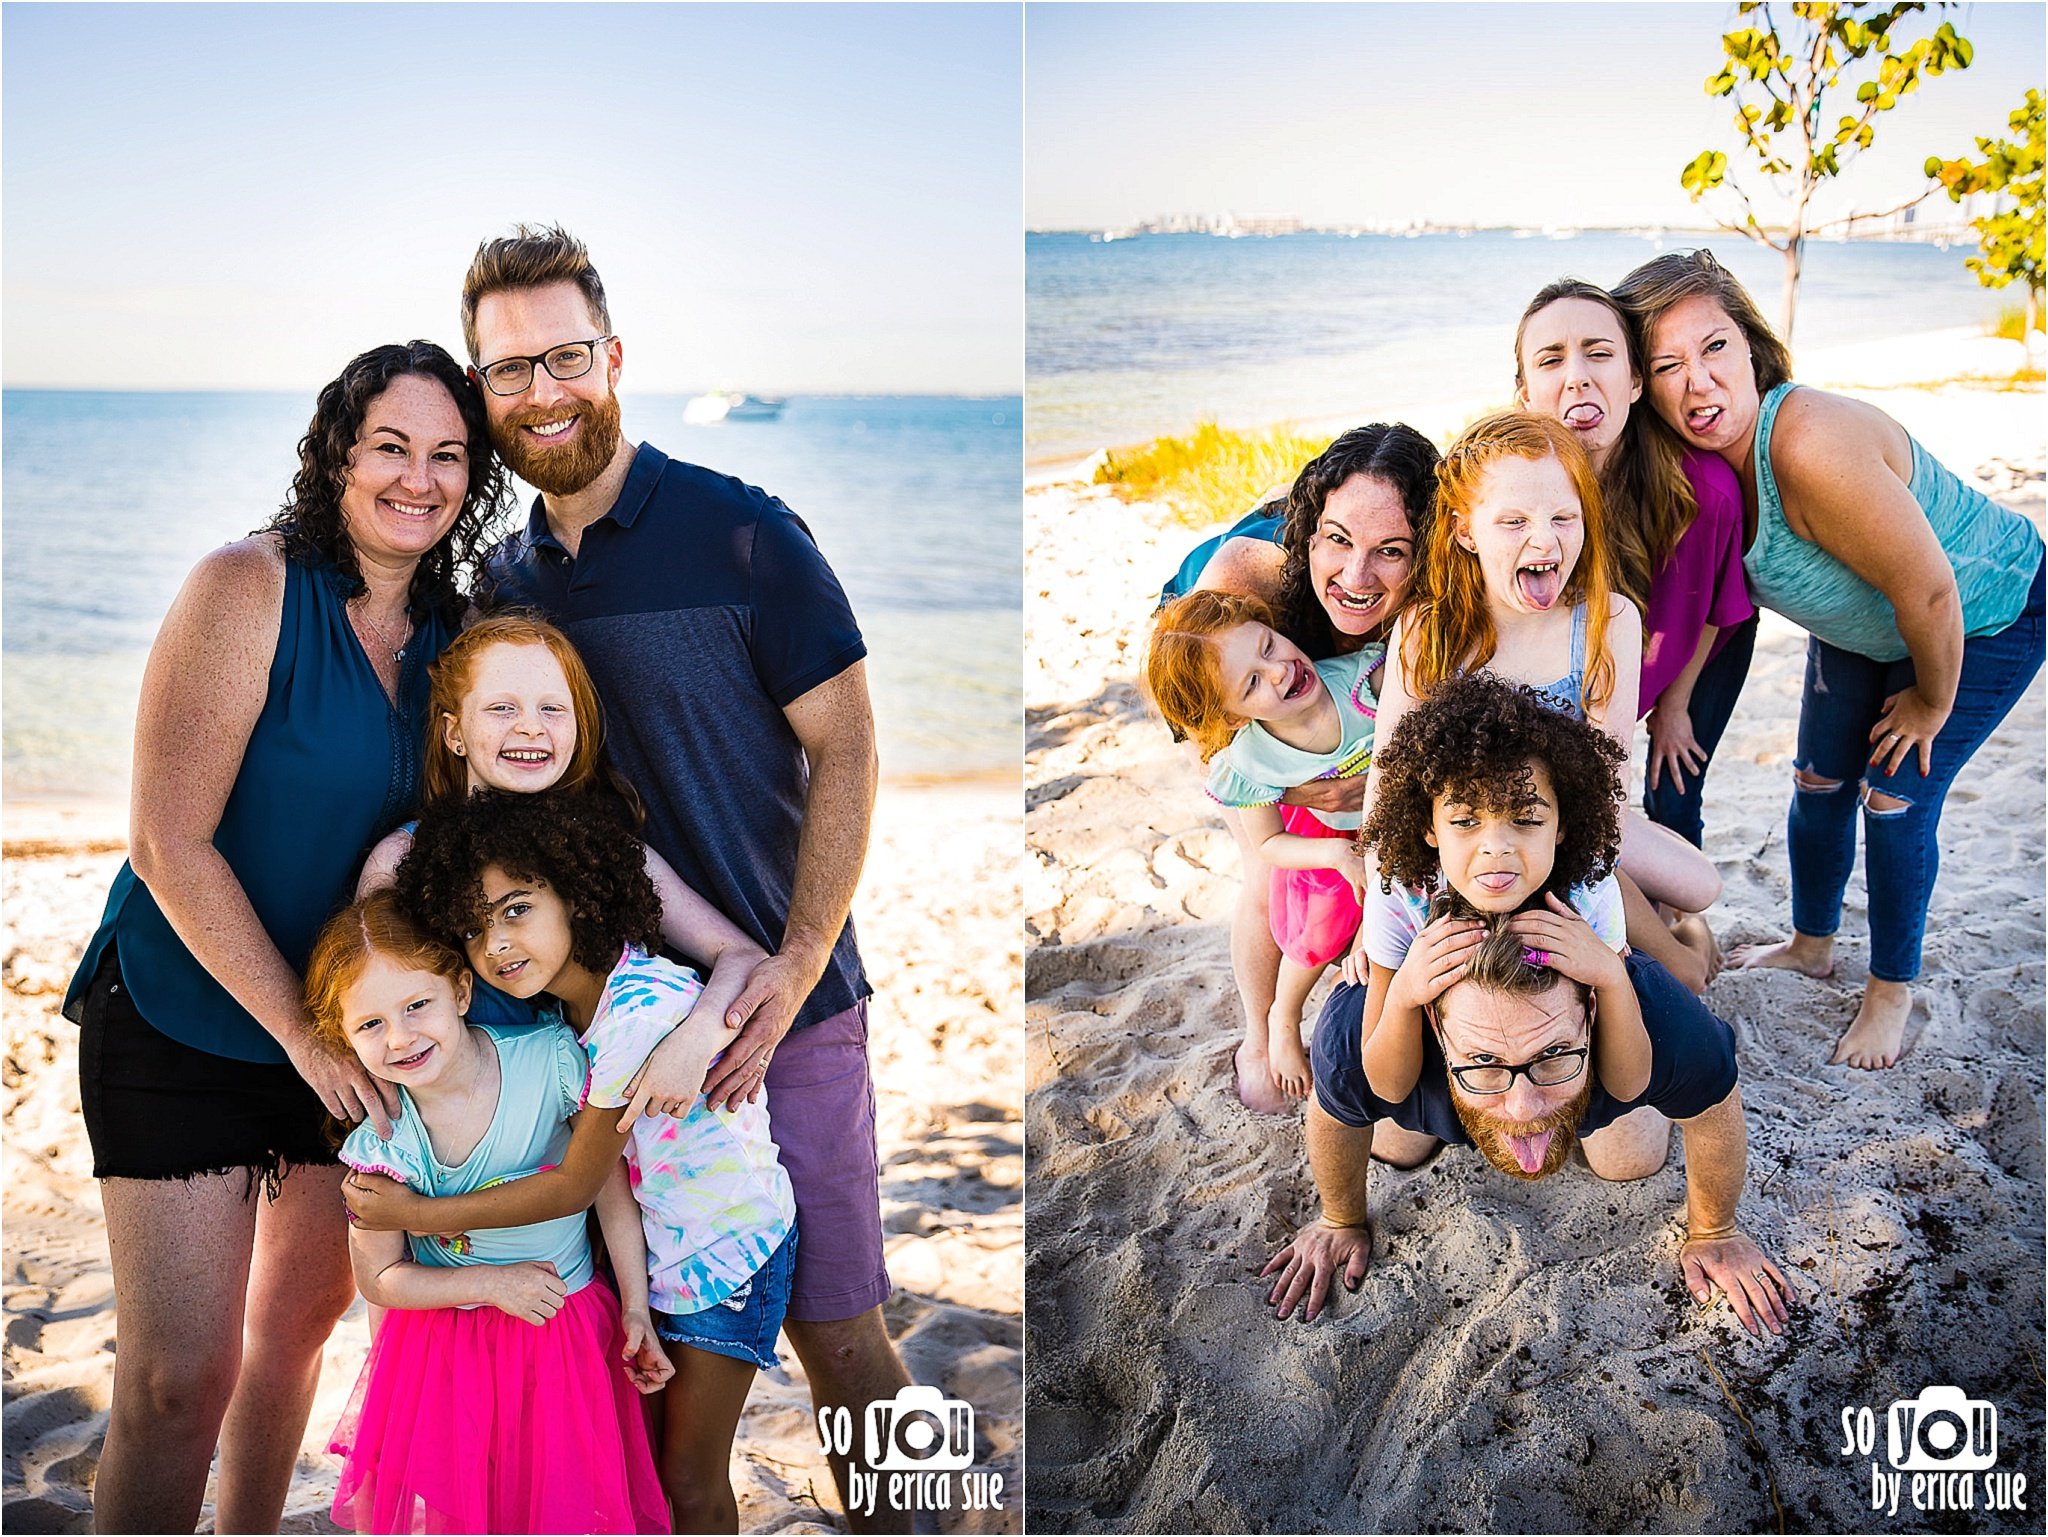 2-lifestyle-family-photographer-key-biscayne-miami-fl-so-you-by-erica-sue-silver-family-CD8A0531 (2).jpg